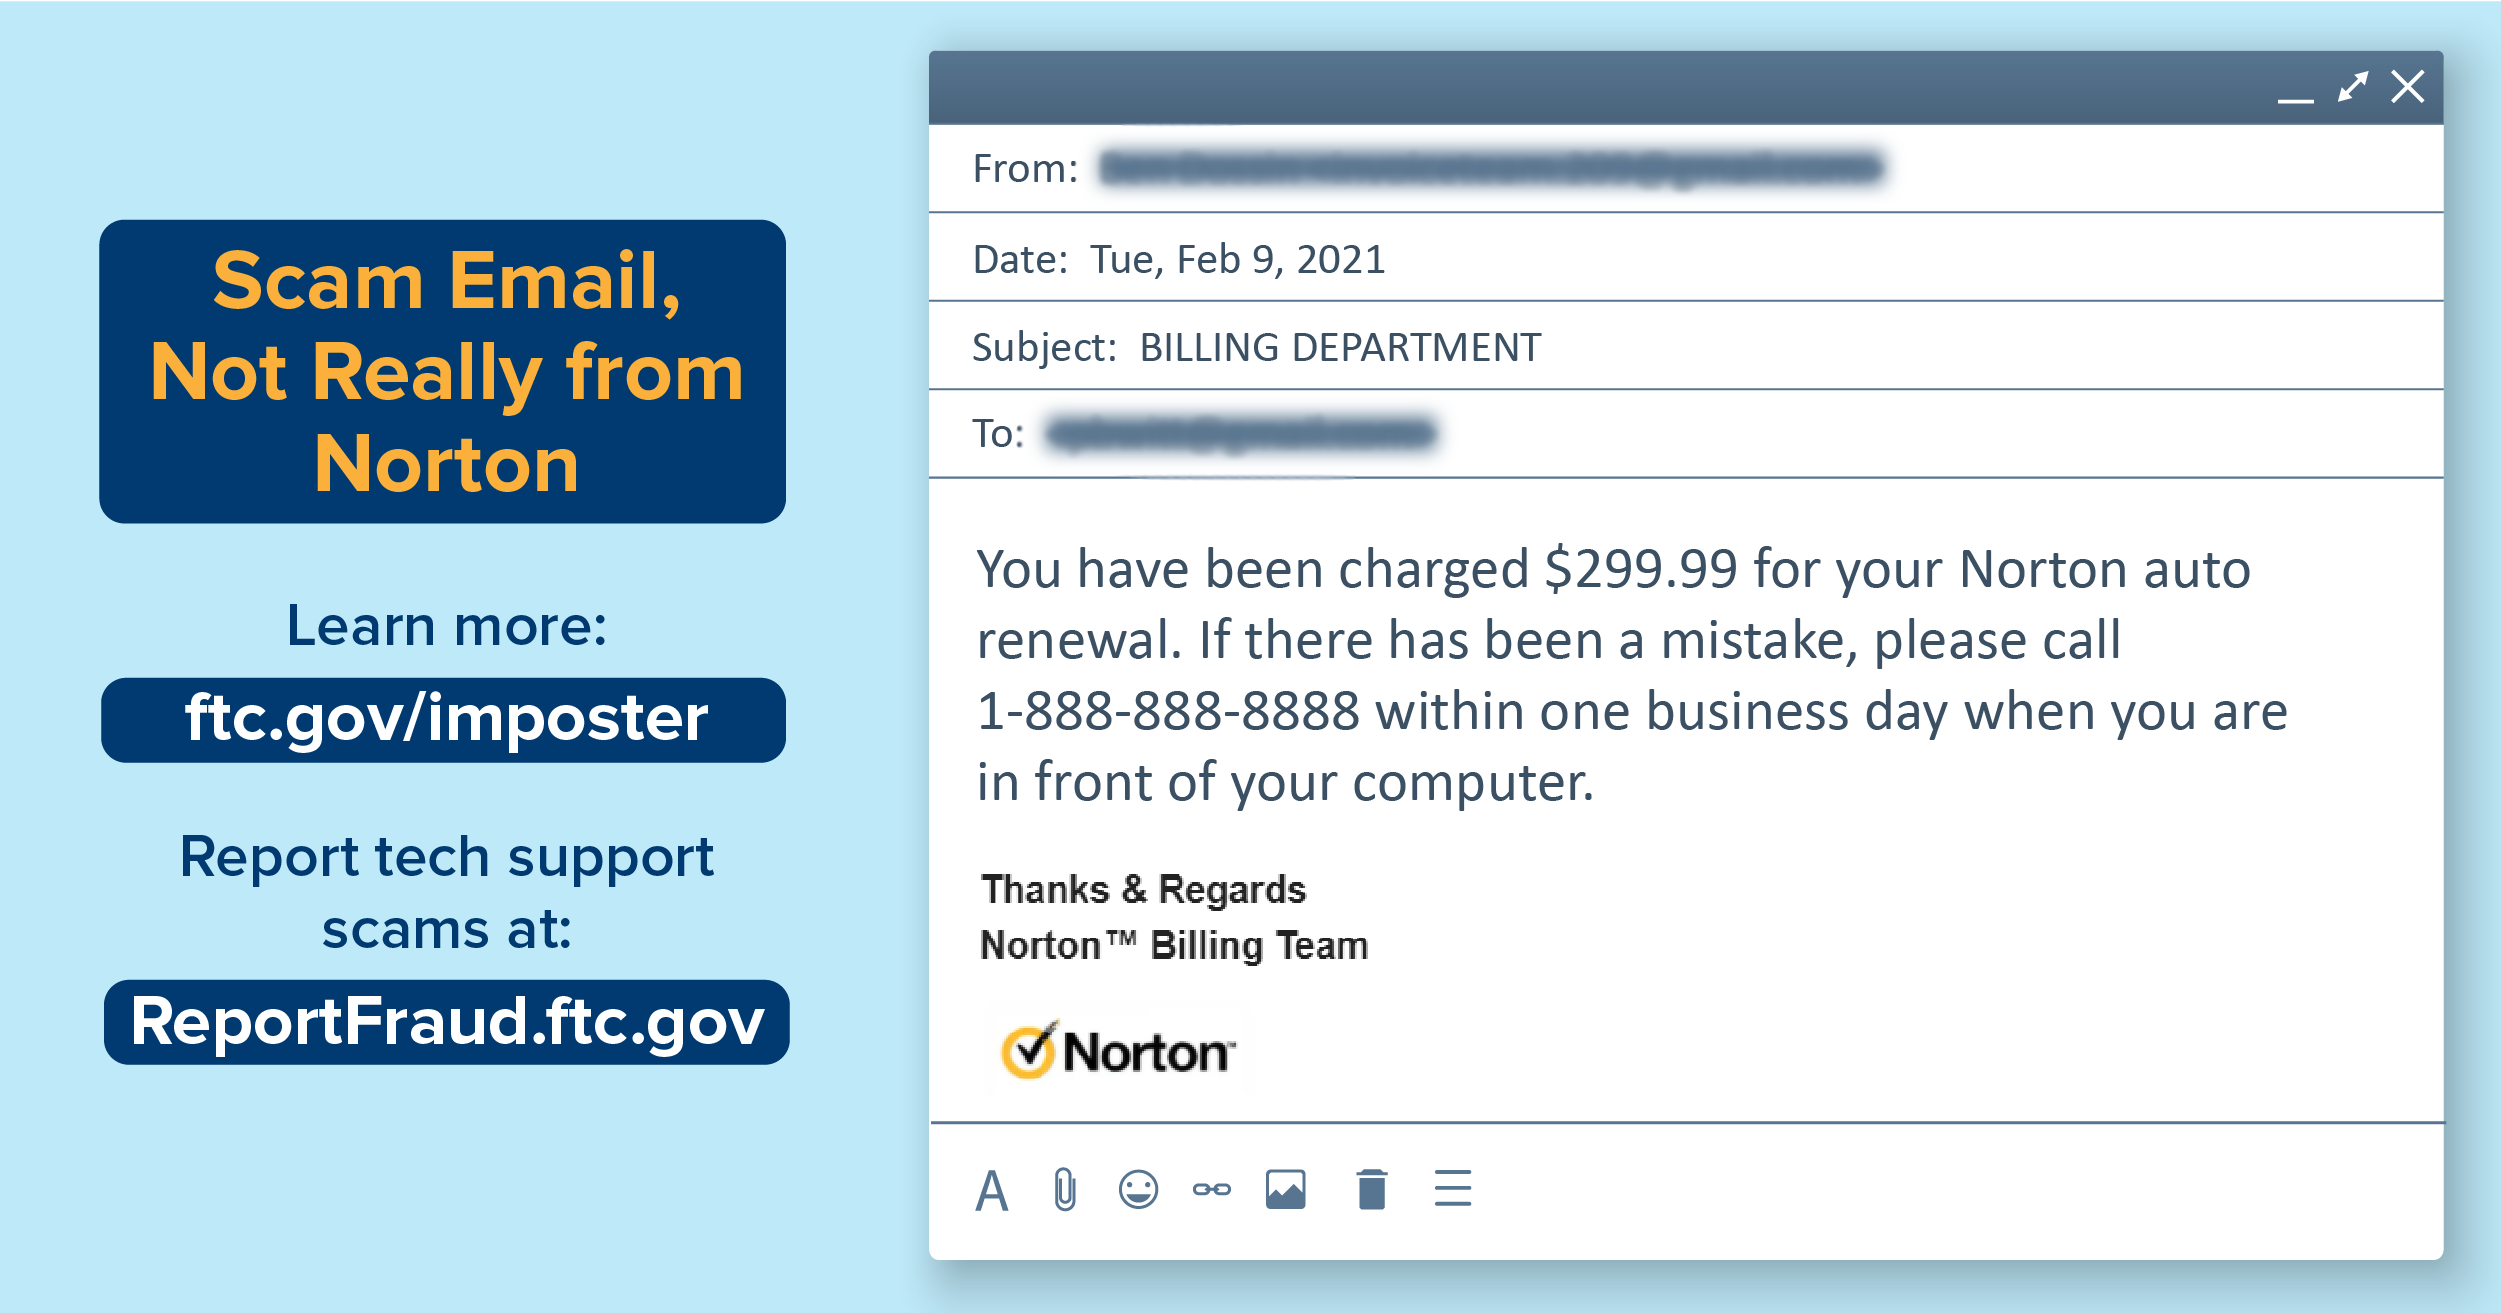  Scam Email, Not Really from Norton. Learn more: ftc.gov/imposter. Report tech support scams at: ReportFraud.ftc.gov. Image of an email. From: [redacted]. Date: Tue, Feb 9, 2021. Subject: BILLING DEPARTMENT. To: [redacted]. Body of email: "You have been charged $299.99 for your Norton auto renewal. If there has been a mistake, please call 1-999-999-9999 within one business day when you are in front of your computer. Thanks & Regards, Norton (TM) Billing Team." Image of Norton logo with yellow circle and black checkmark.